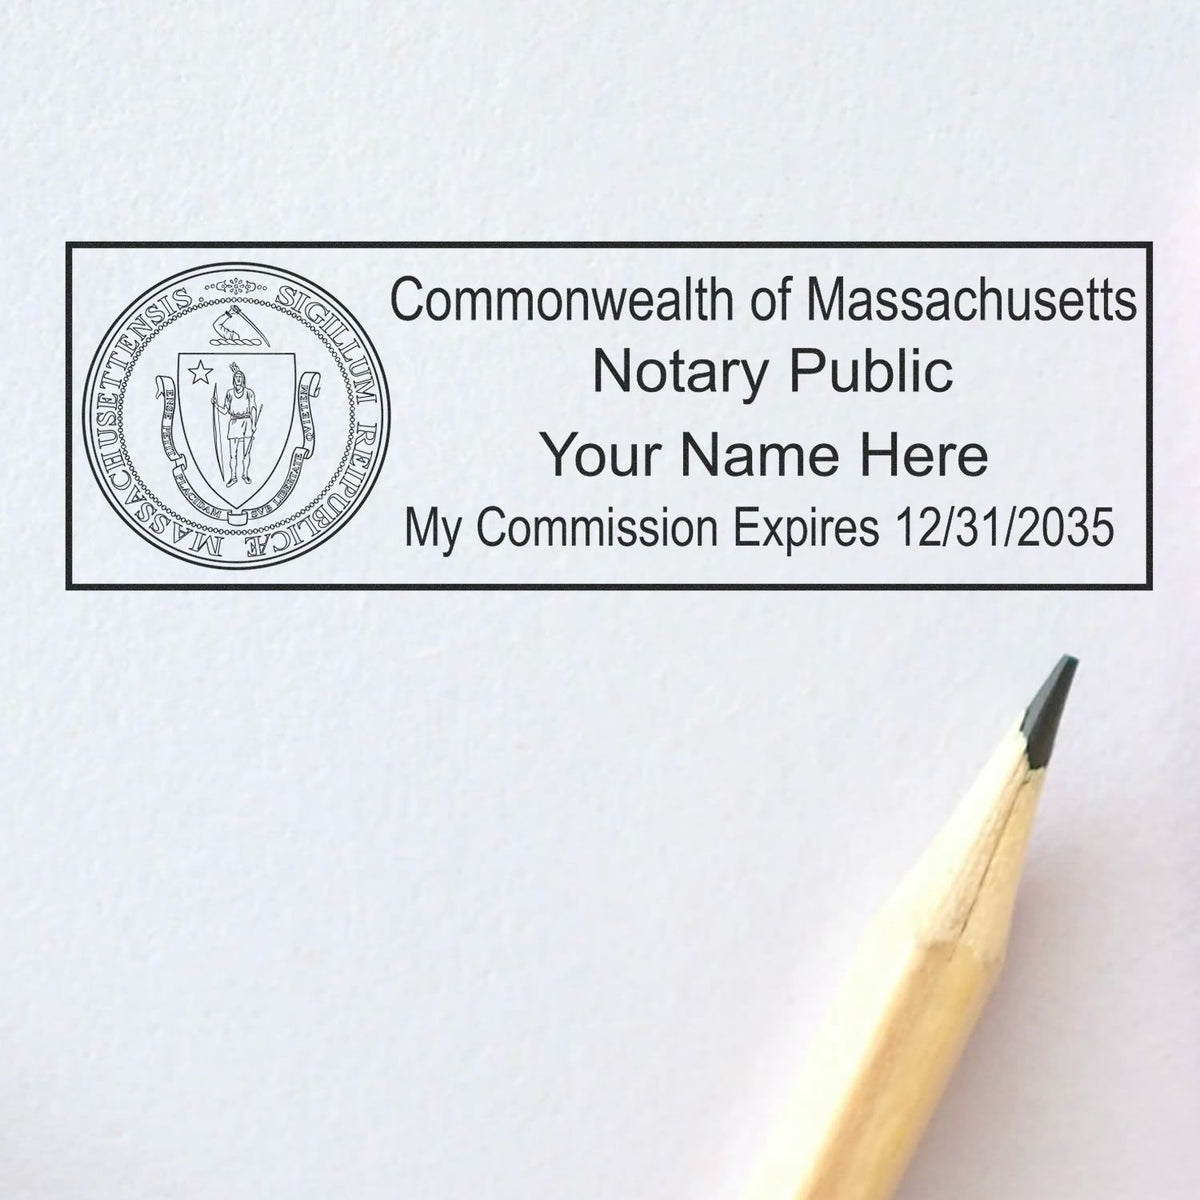 An alternative view of the MaxLight Premium Pre-Inked Massachusetts State Seal Notarial Stamp stamped on a sheet of paper showing the image in use